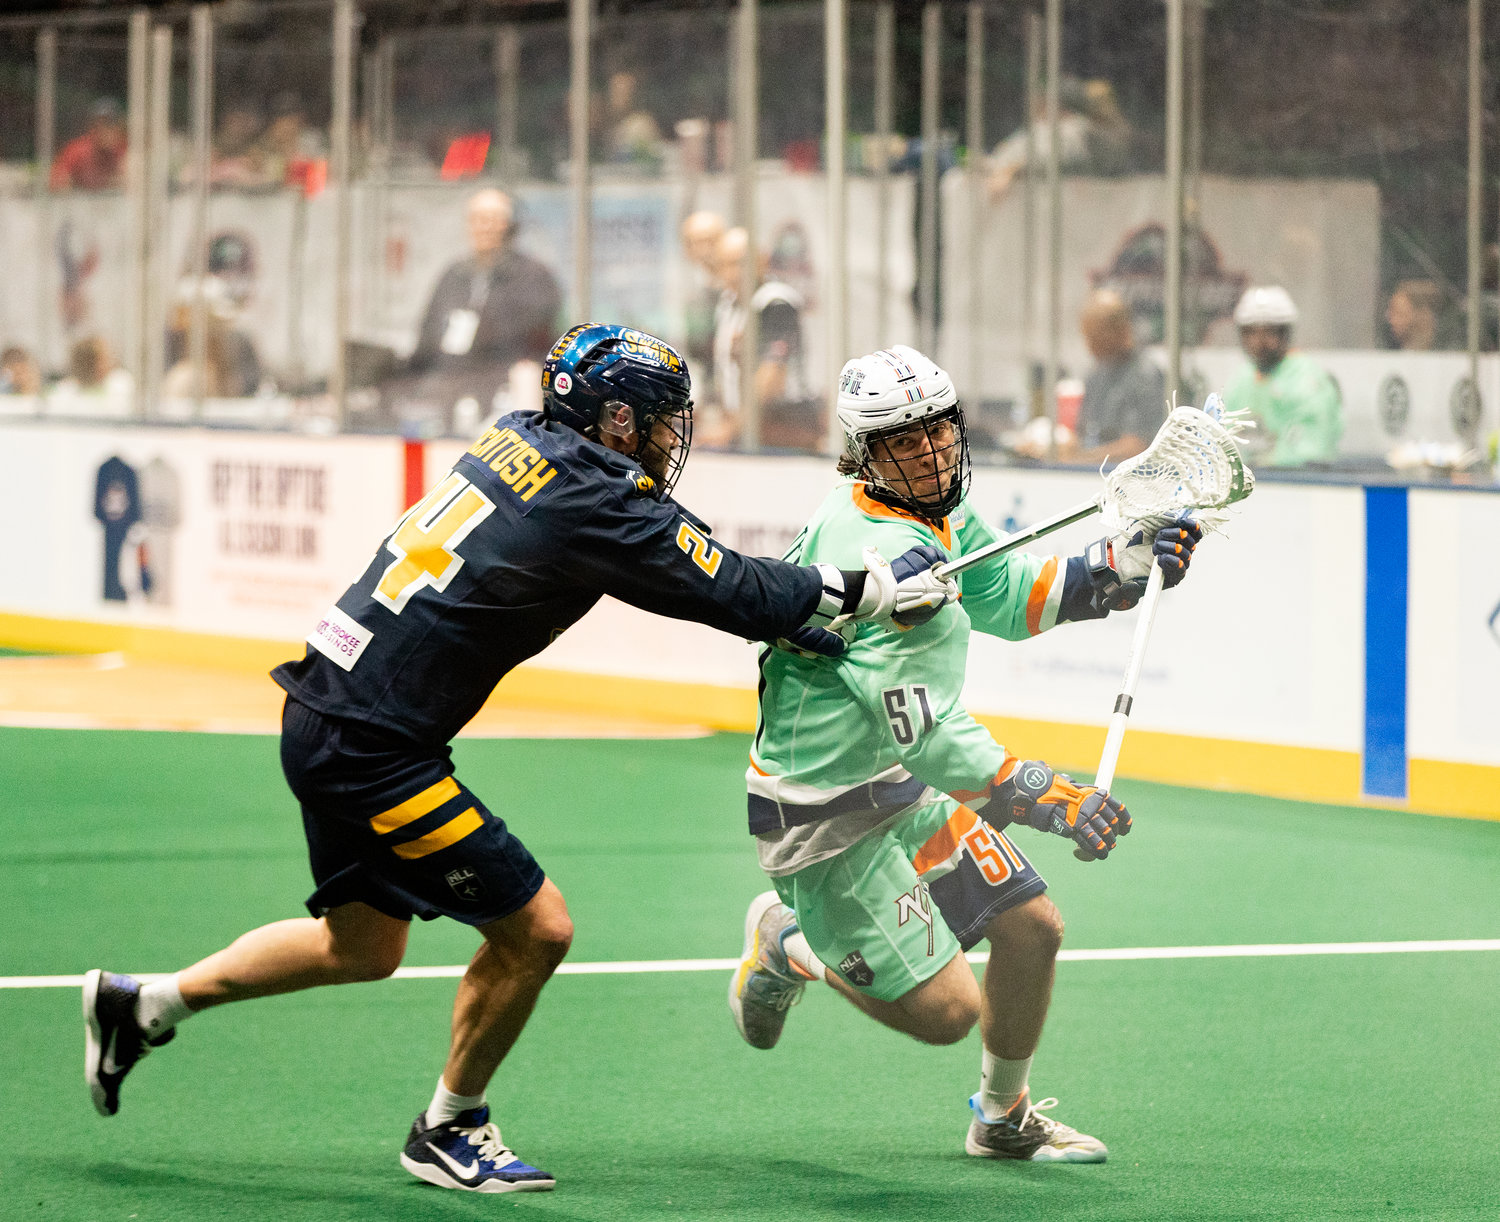 Jeff Teat, right, had seven points in the Riptide's loss to Georgia in the final home game of the season.